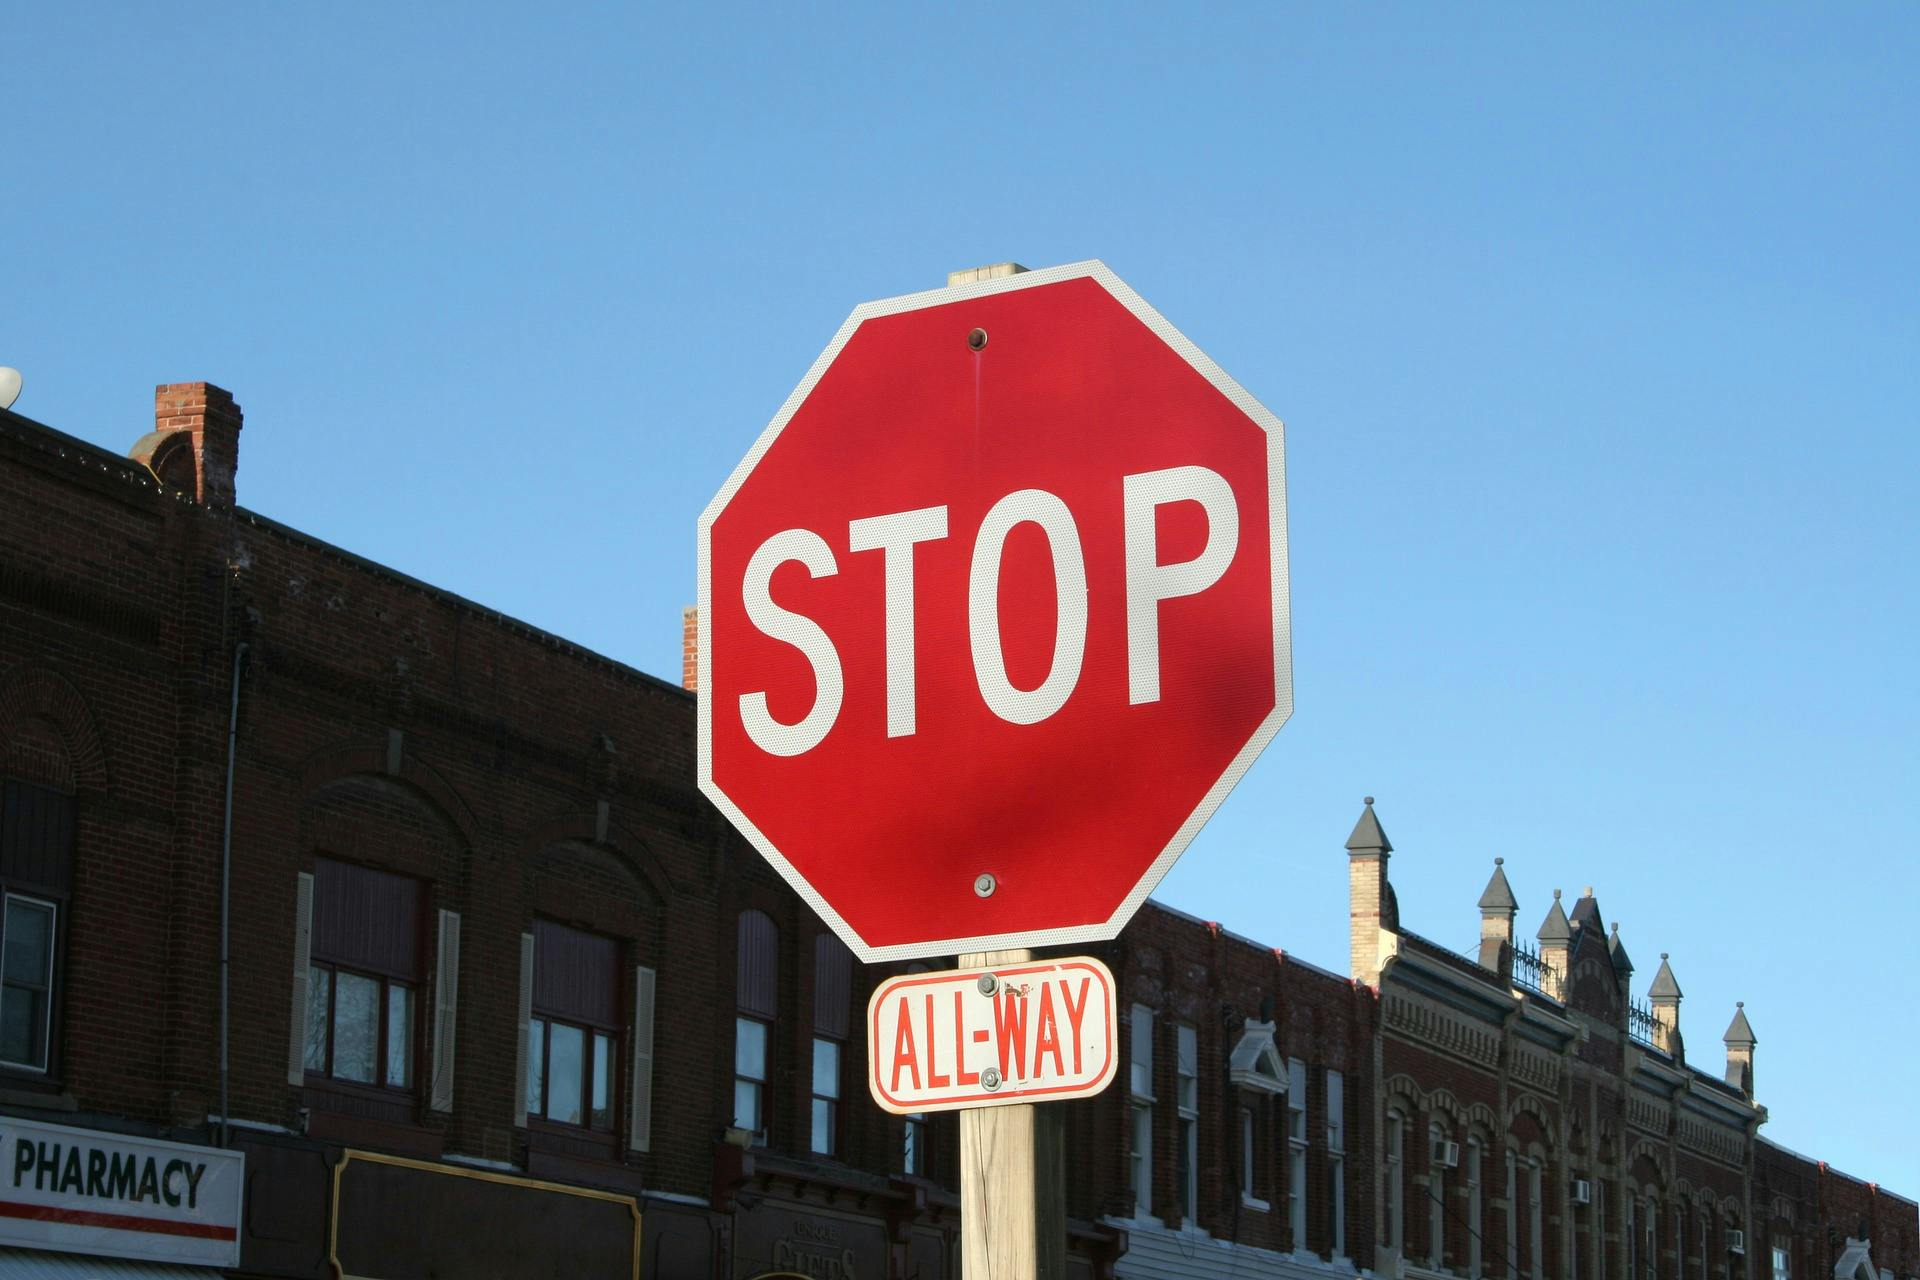 all-way stop